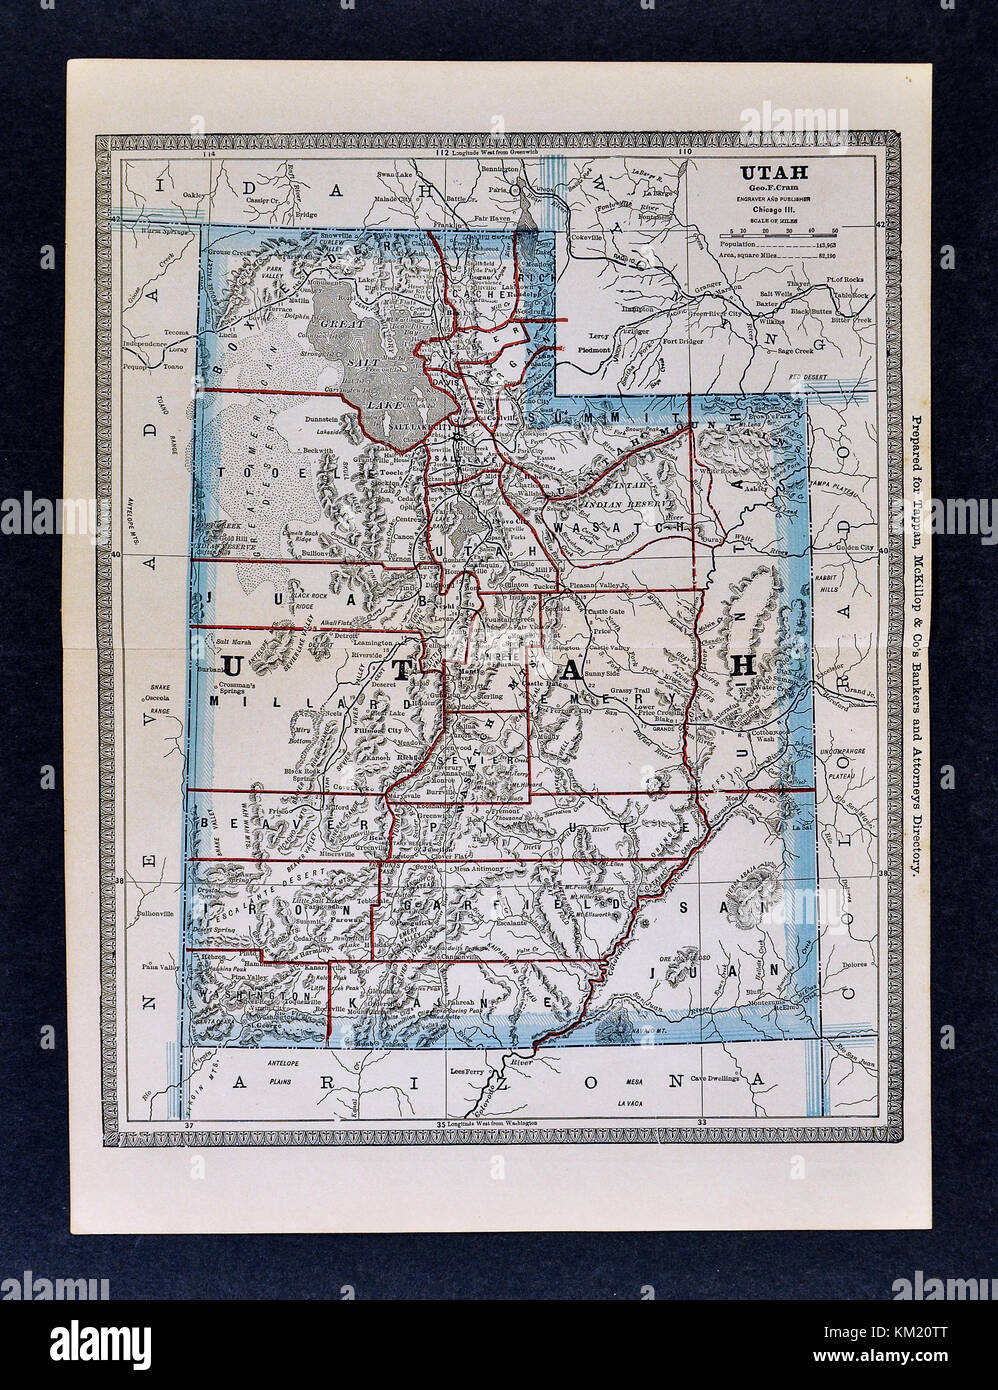 George Cram Antique Map from 1866 Atlas for Attorneys and Bankers: United States - Utah - Salt Lake City Great Salt Lake Provo Moab Stock Photo